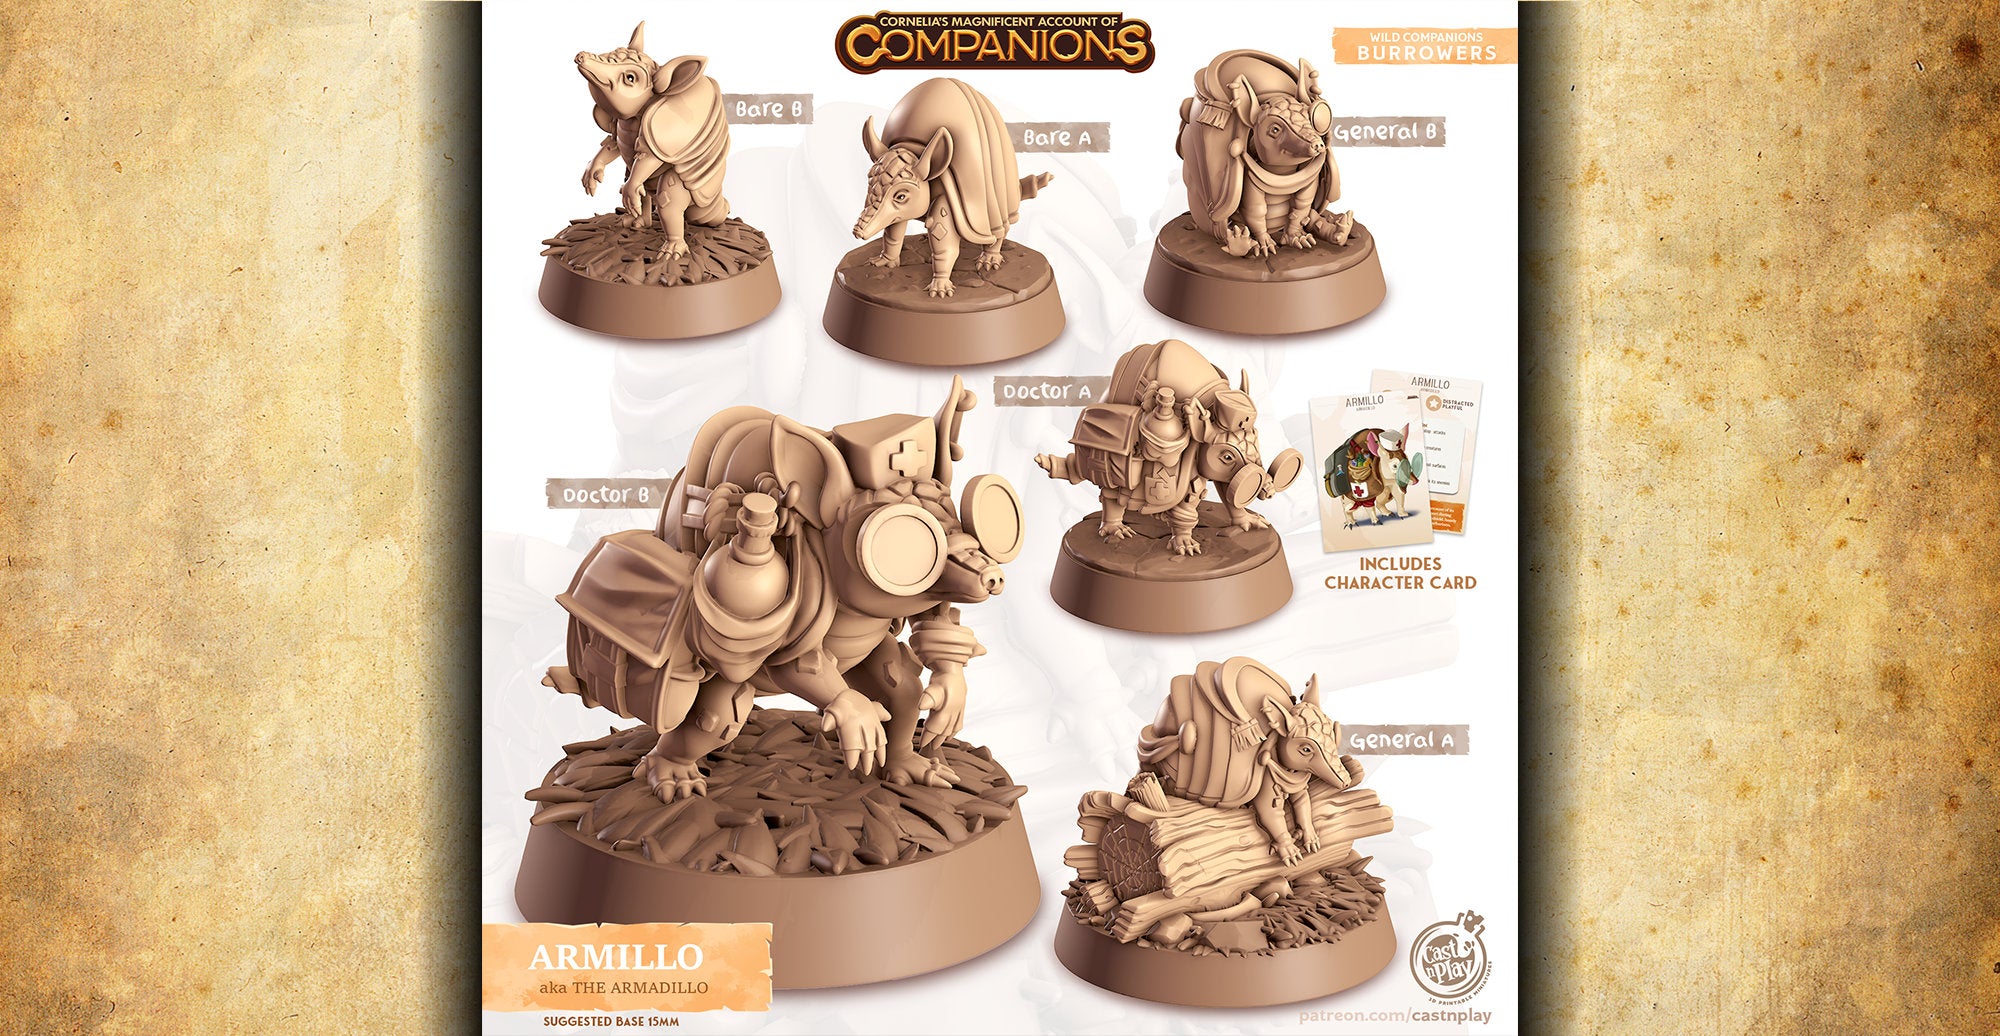 COMPANION "Armillo The Armadillo" | 8K | Dungeons and Dragons | DnD | Pathfinder | Tabletop | ttrpg | Wargaming | Warhammer | 28-32 mm-Role Playing Miniatures